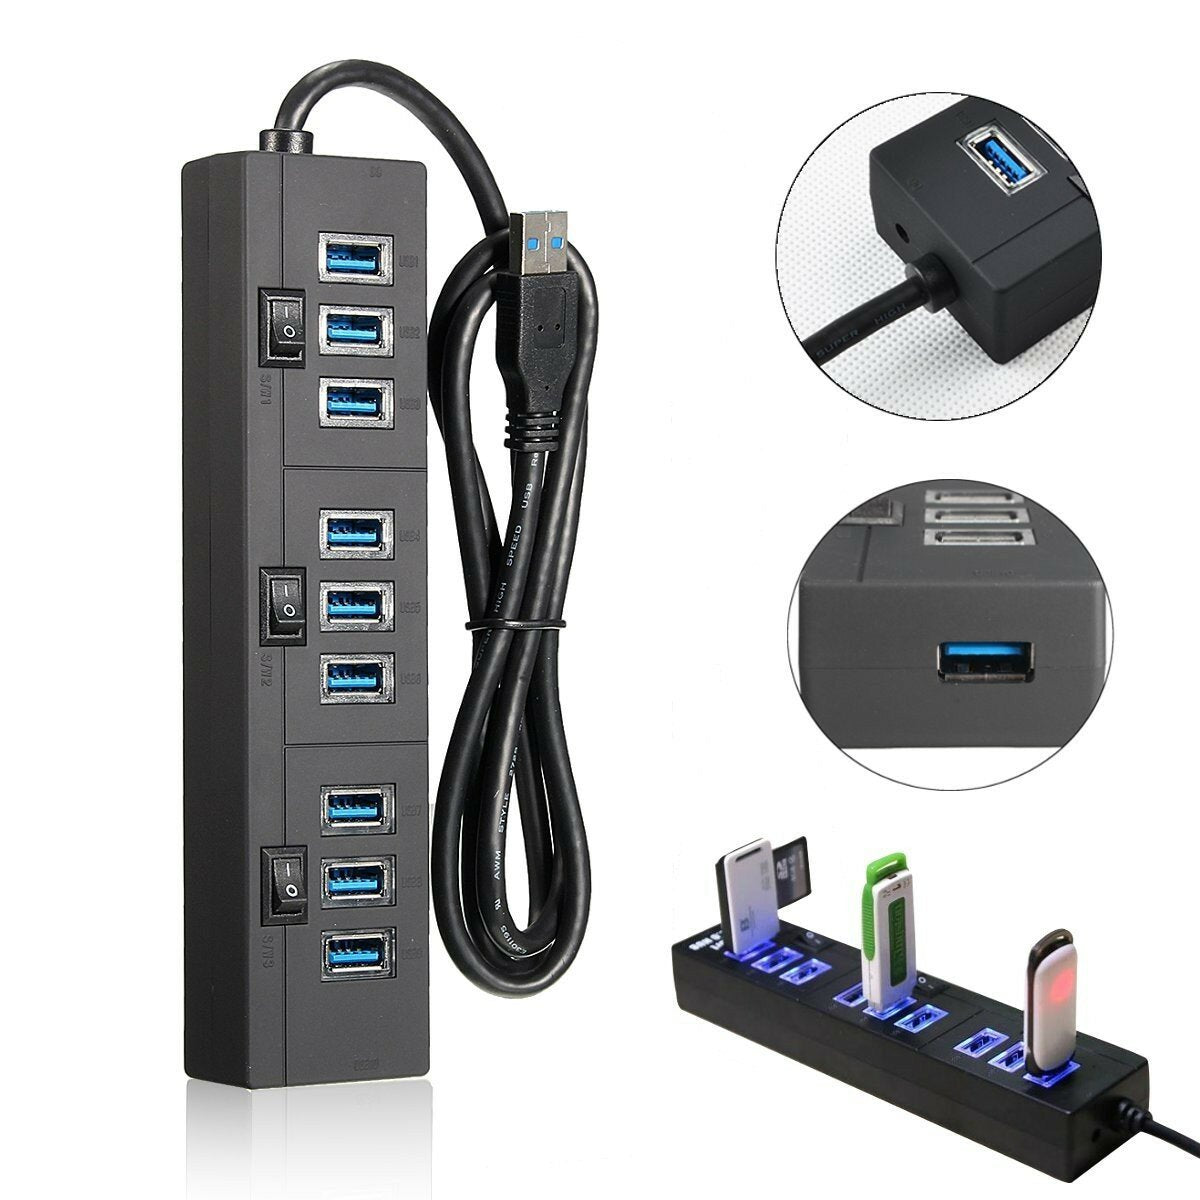 10 Port 3.0 USB Hub Adapter Charger with Switch For Computer PC Laptop iPhone XS 11Pro Mi10 9Pro Note 9S